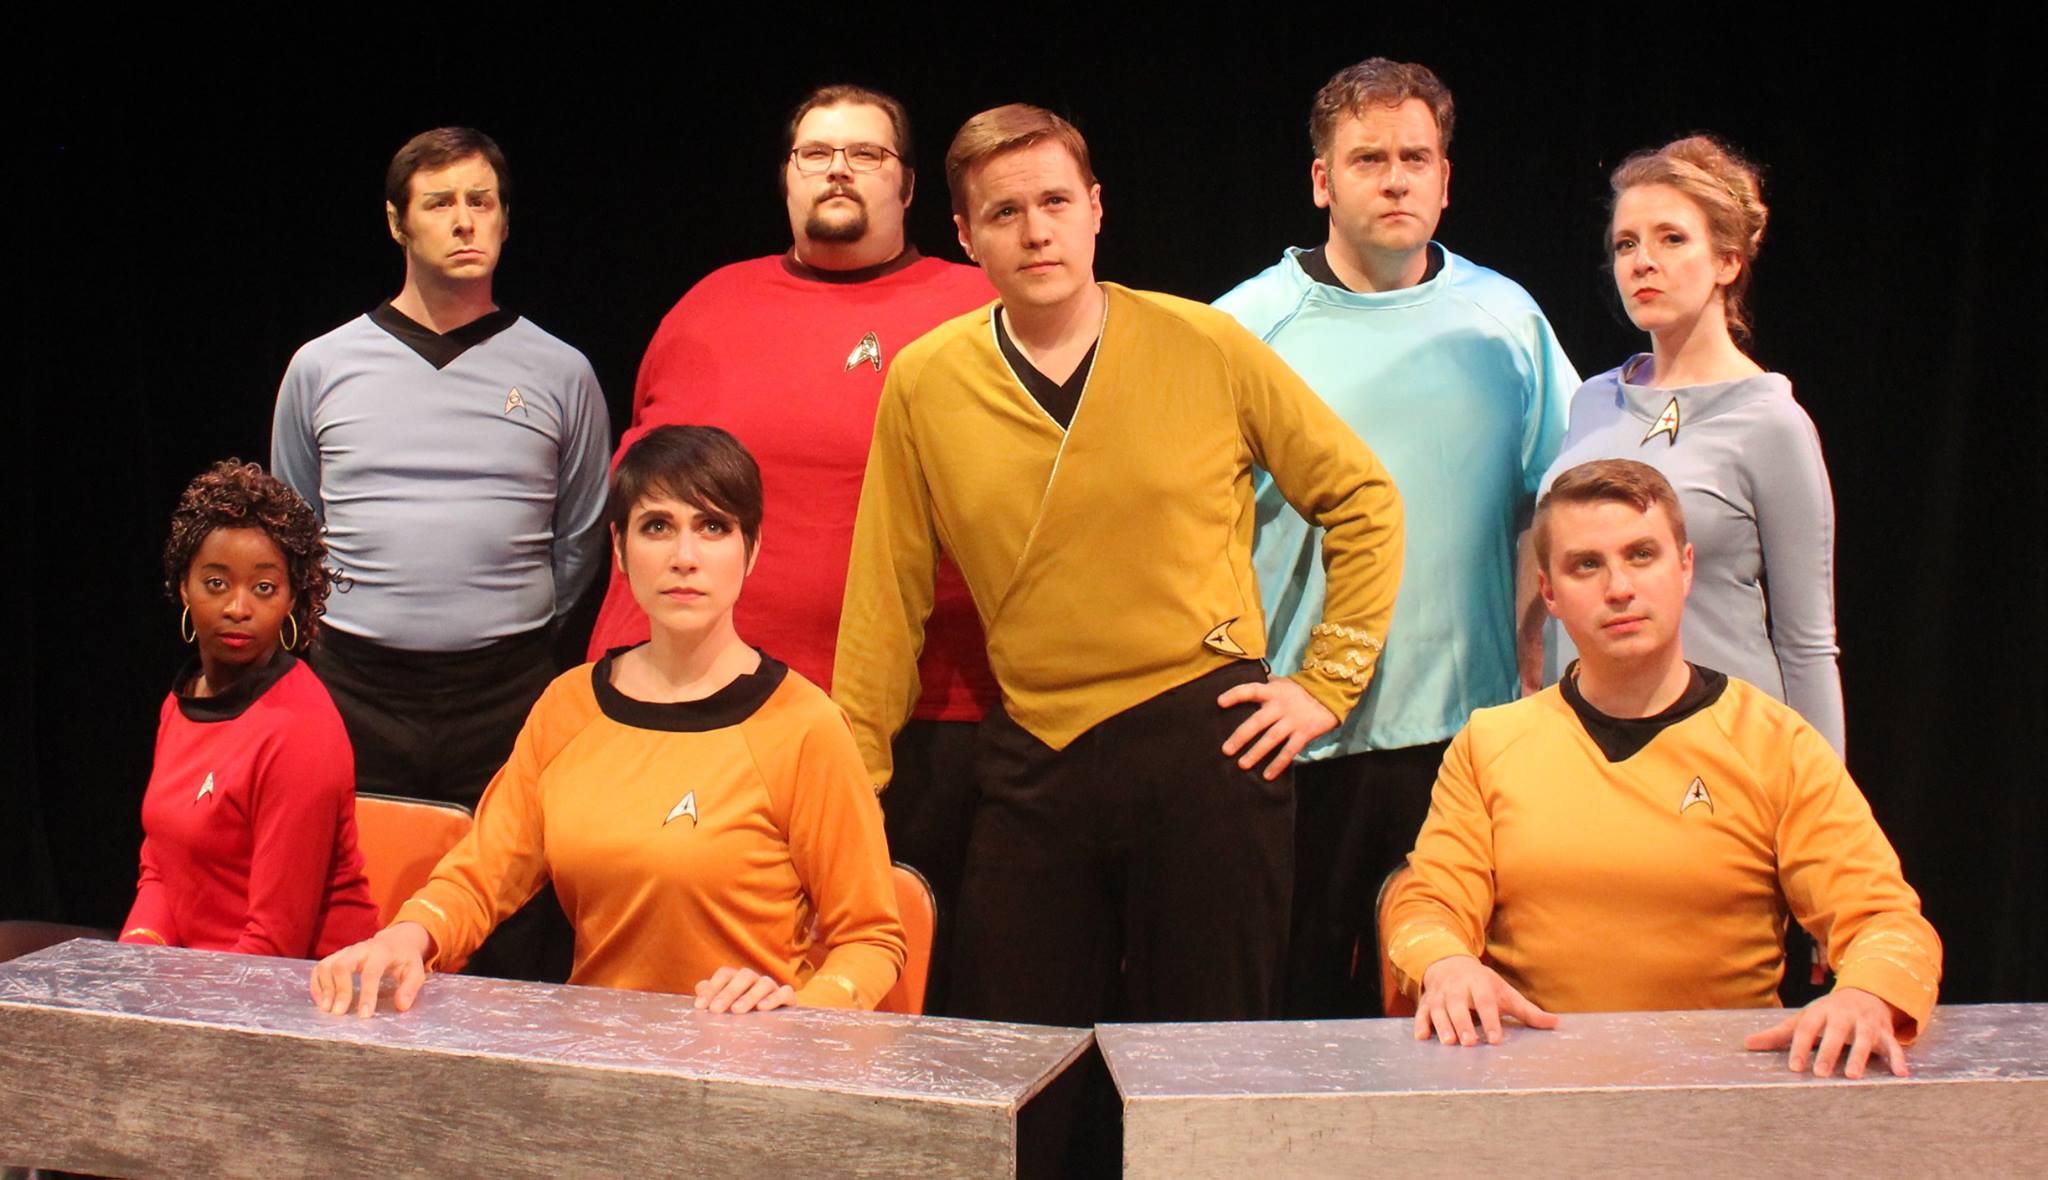 A cast photo for the Star Trek parody Where No Man Gas Gone Before. It features Cheryl as Nurse Chapel and actors portraying Spock, Kirk, Uhura, Bones, and other original crew members.